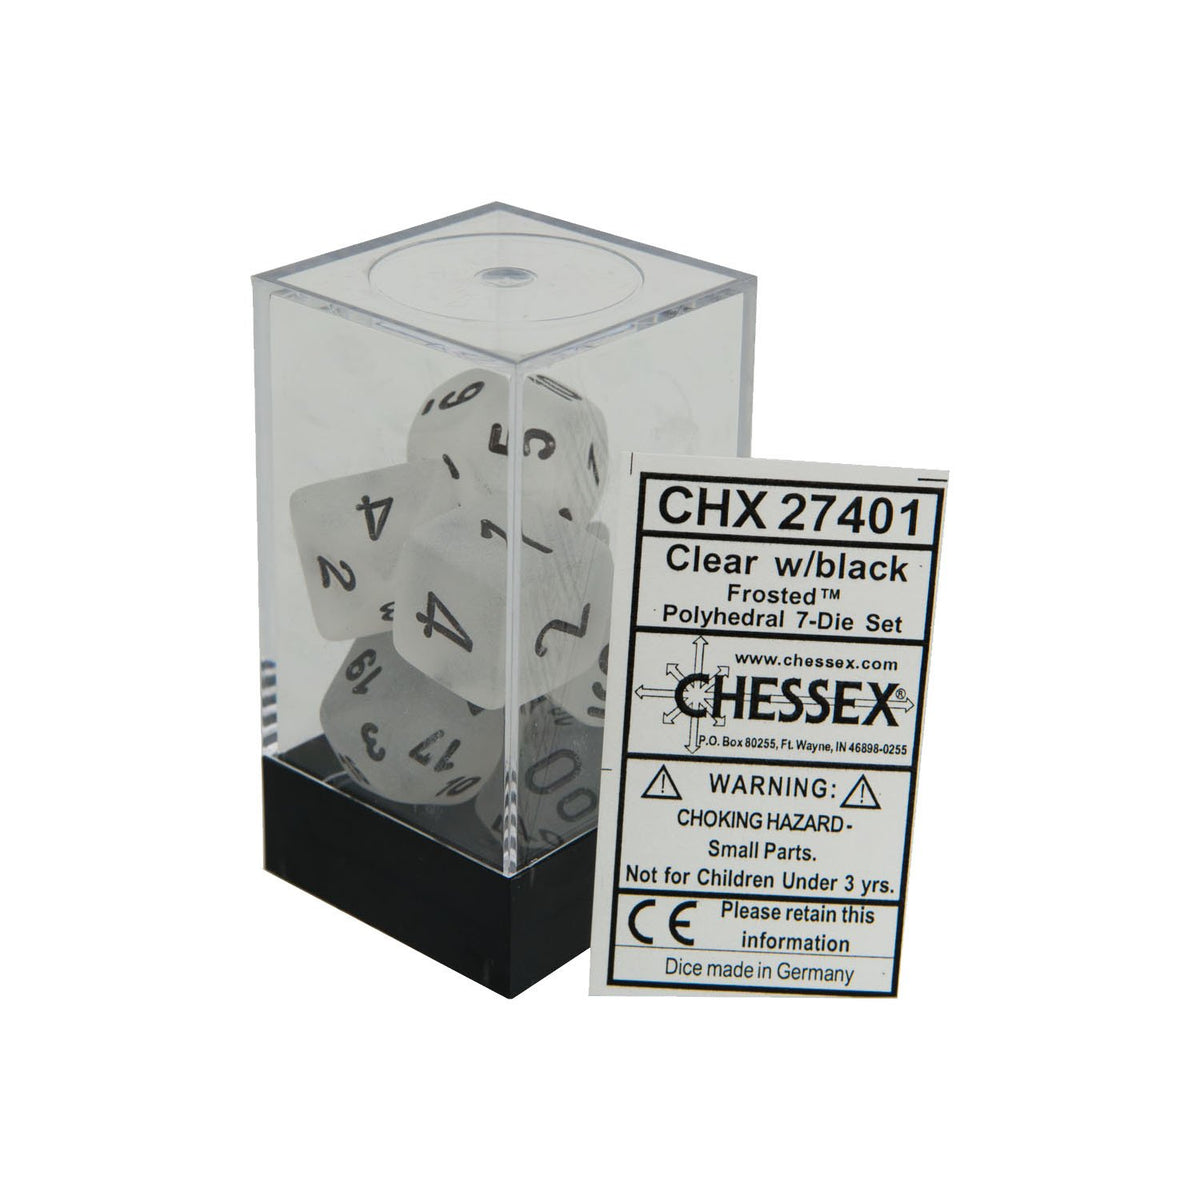 Chessex - Frosted Polyhedral 7-Die Set - Clear/Black (CHX27401)